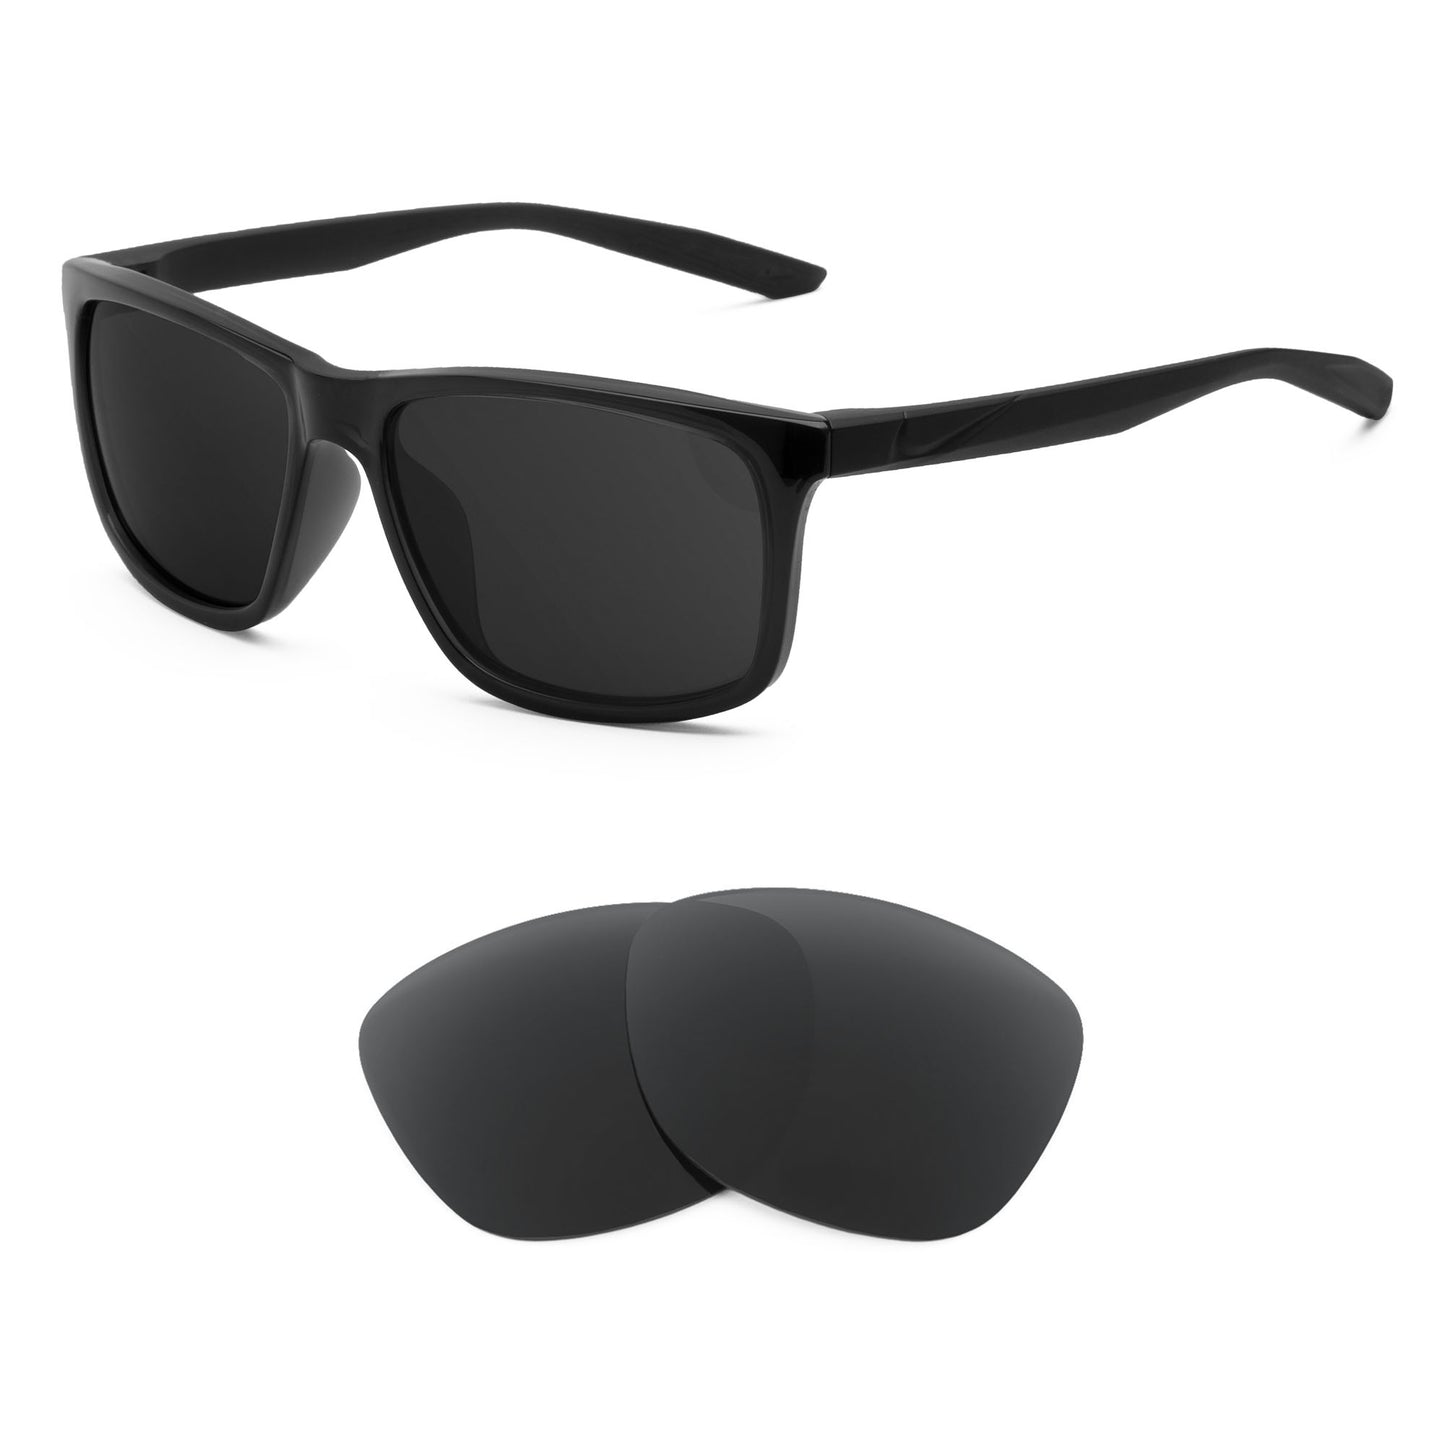 Nike Chaser Ascent sunglasses with replacement lenses